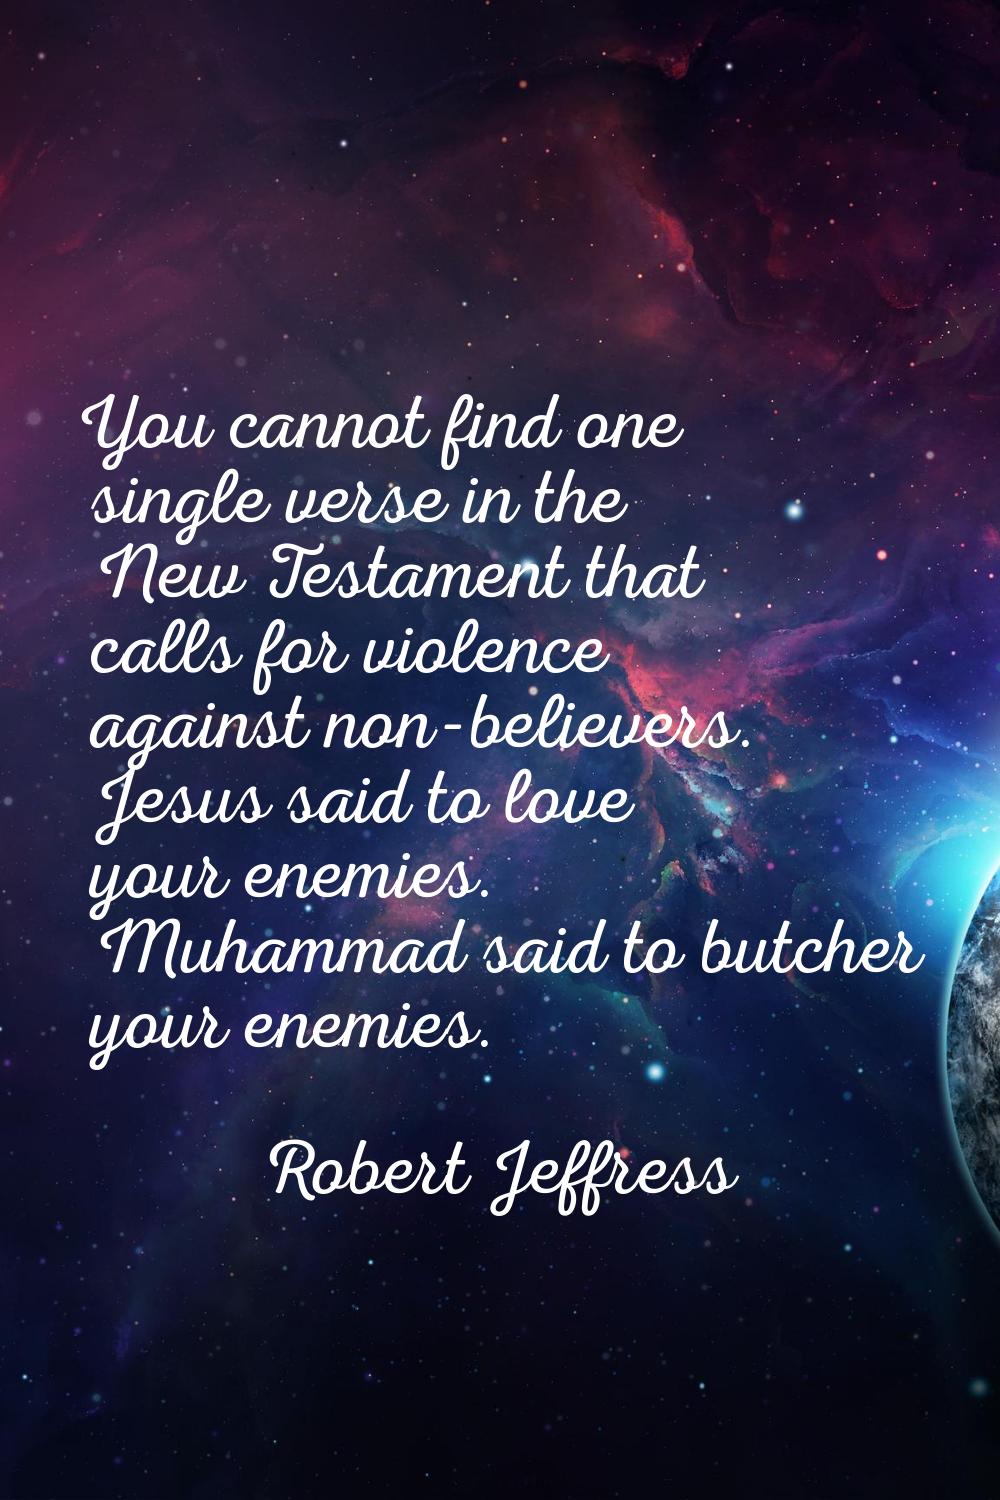 You cannot find one single verse in the New Testament that calls for violence against non-believers